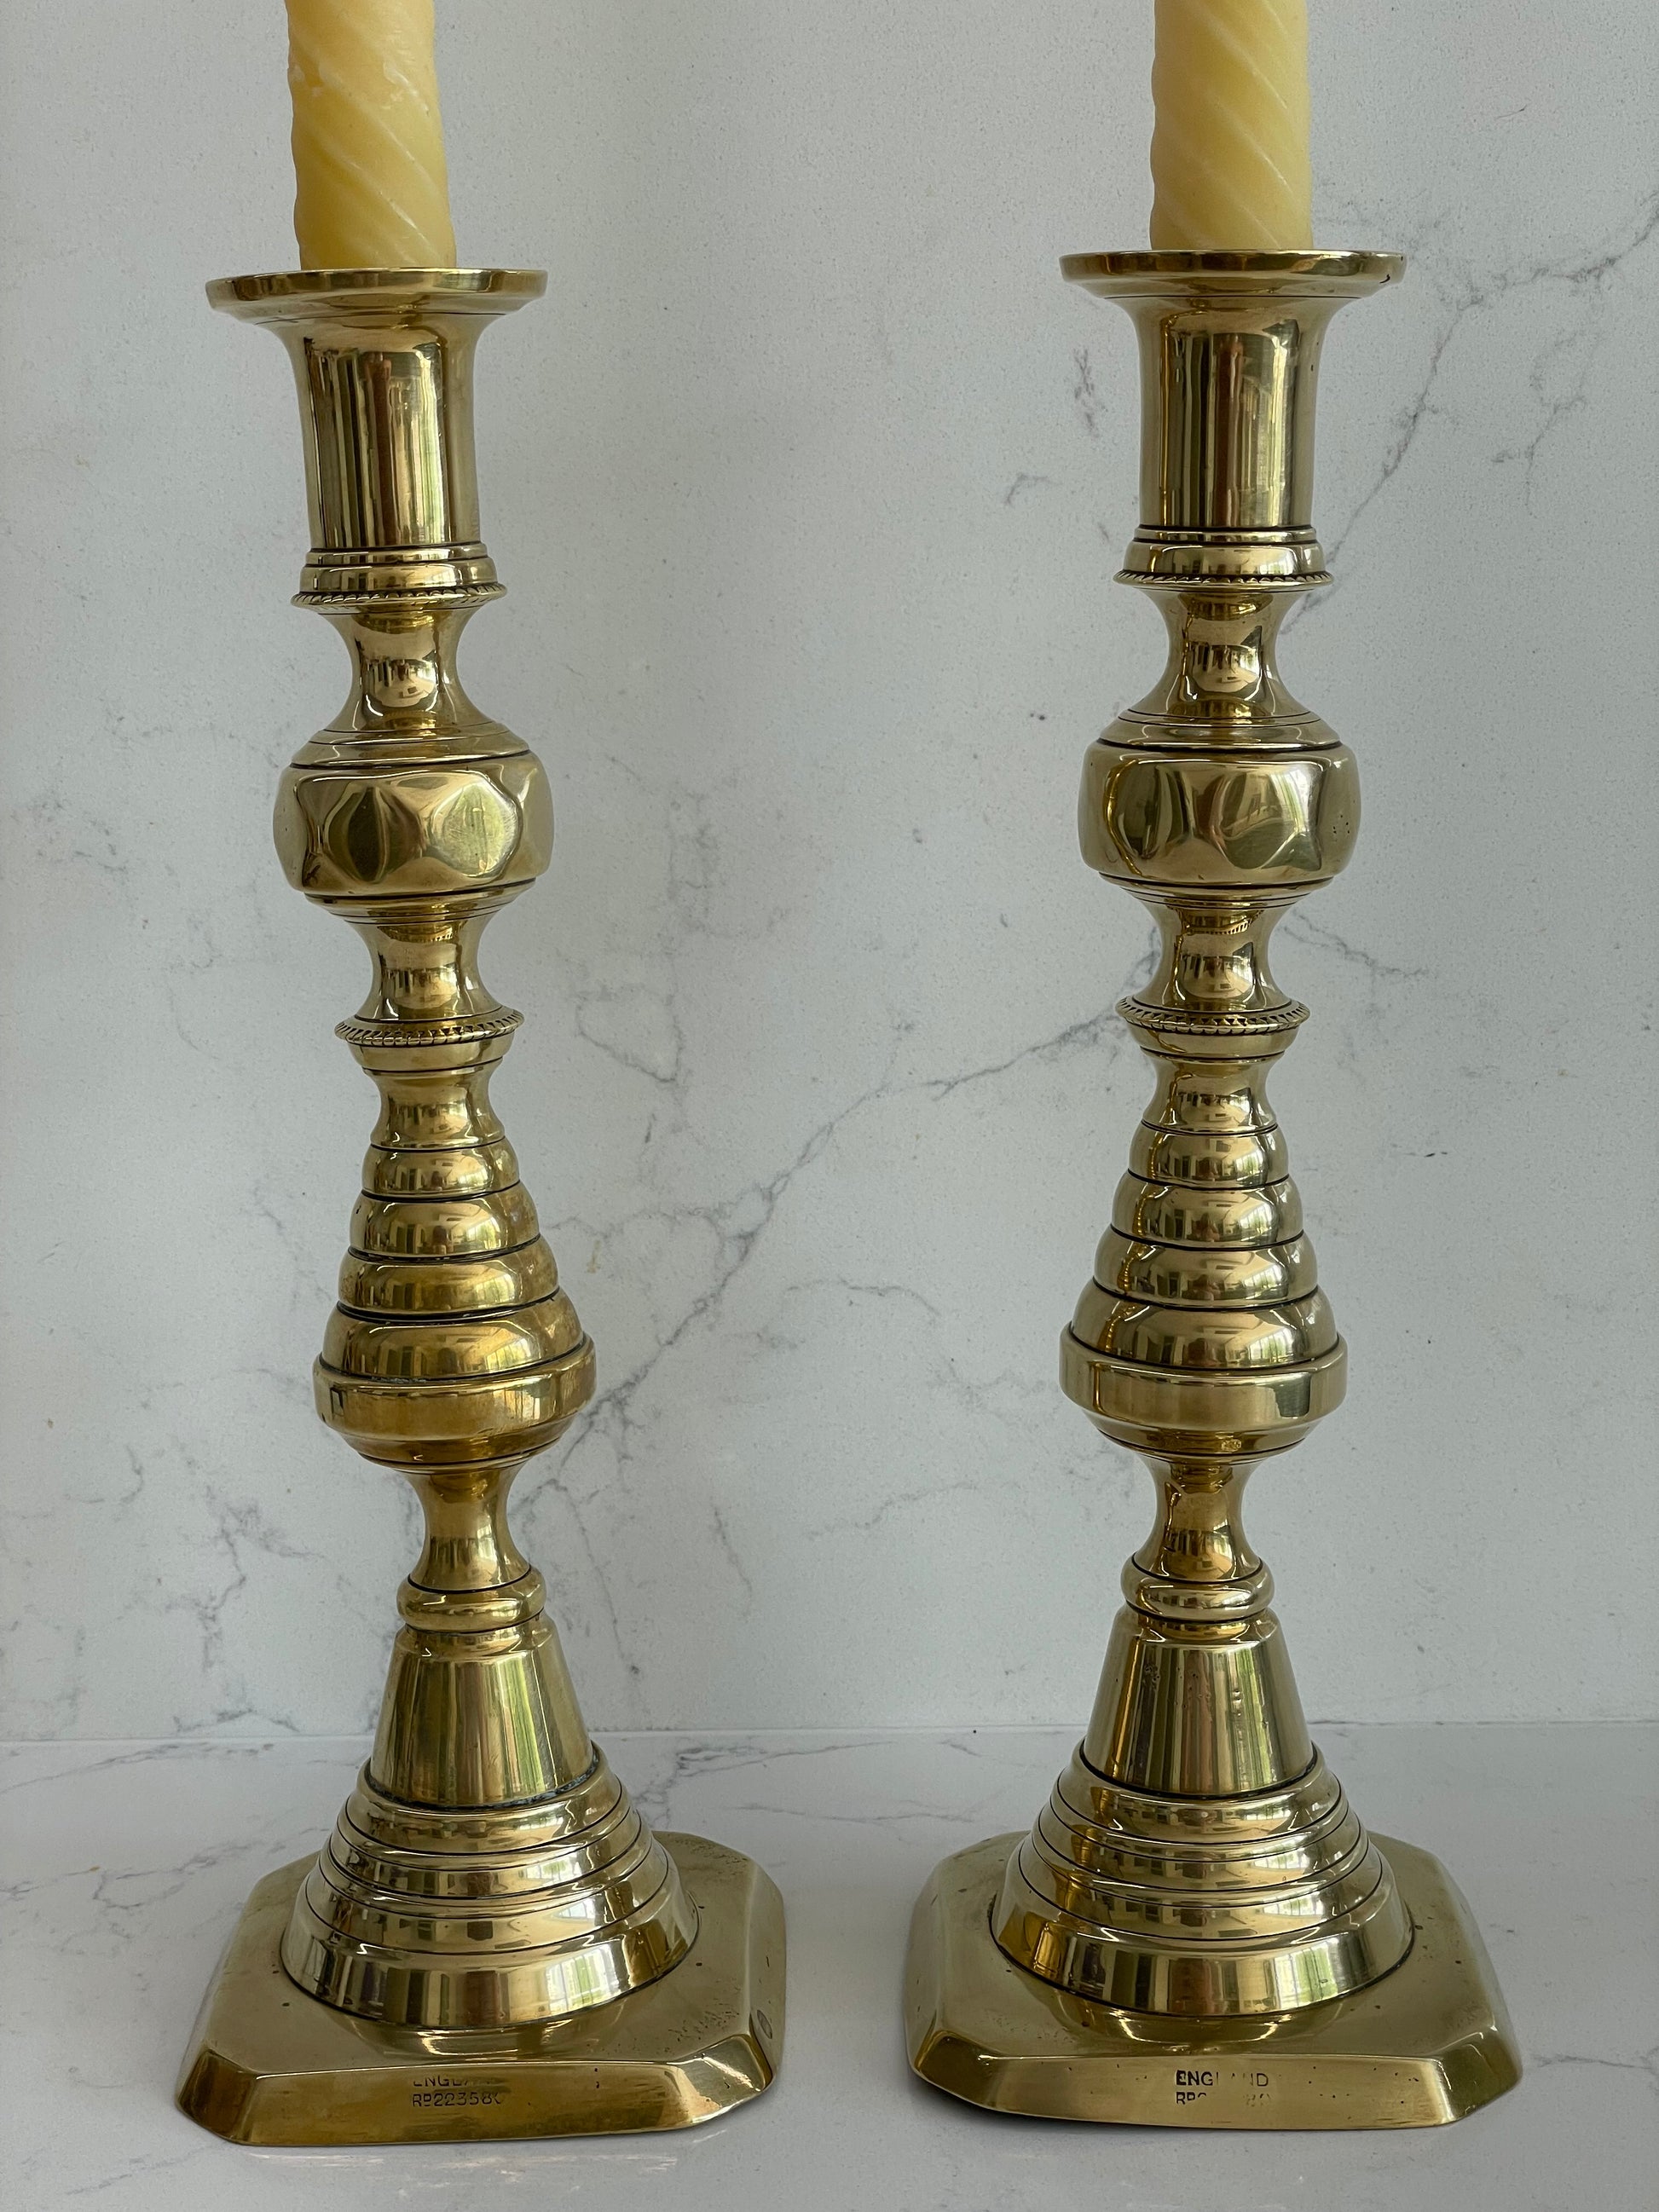 Vtg Solid Brass Open Barley Twist Candlestick Pair Candle Holder